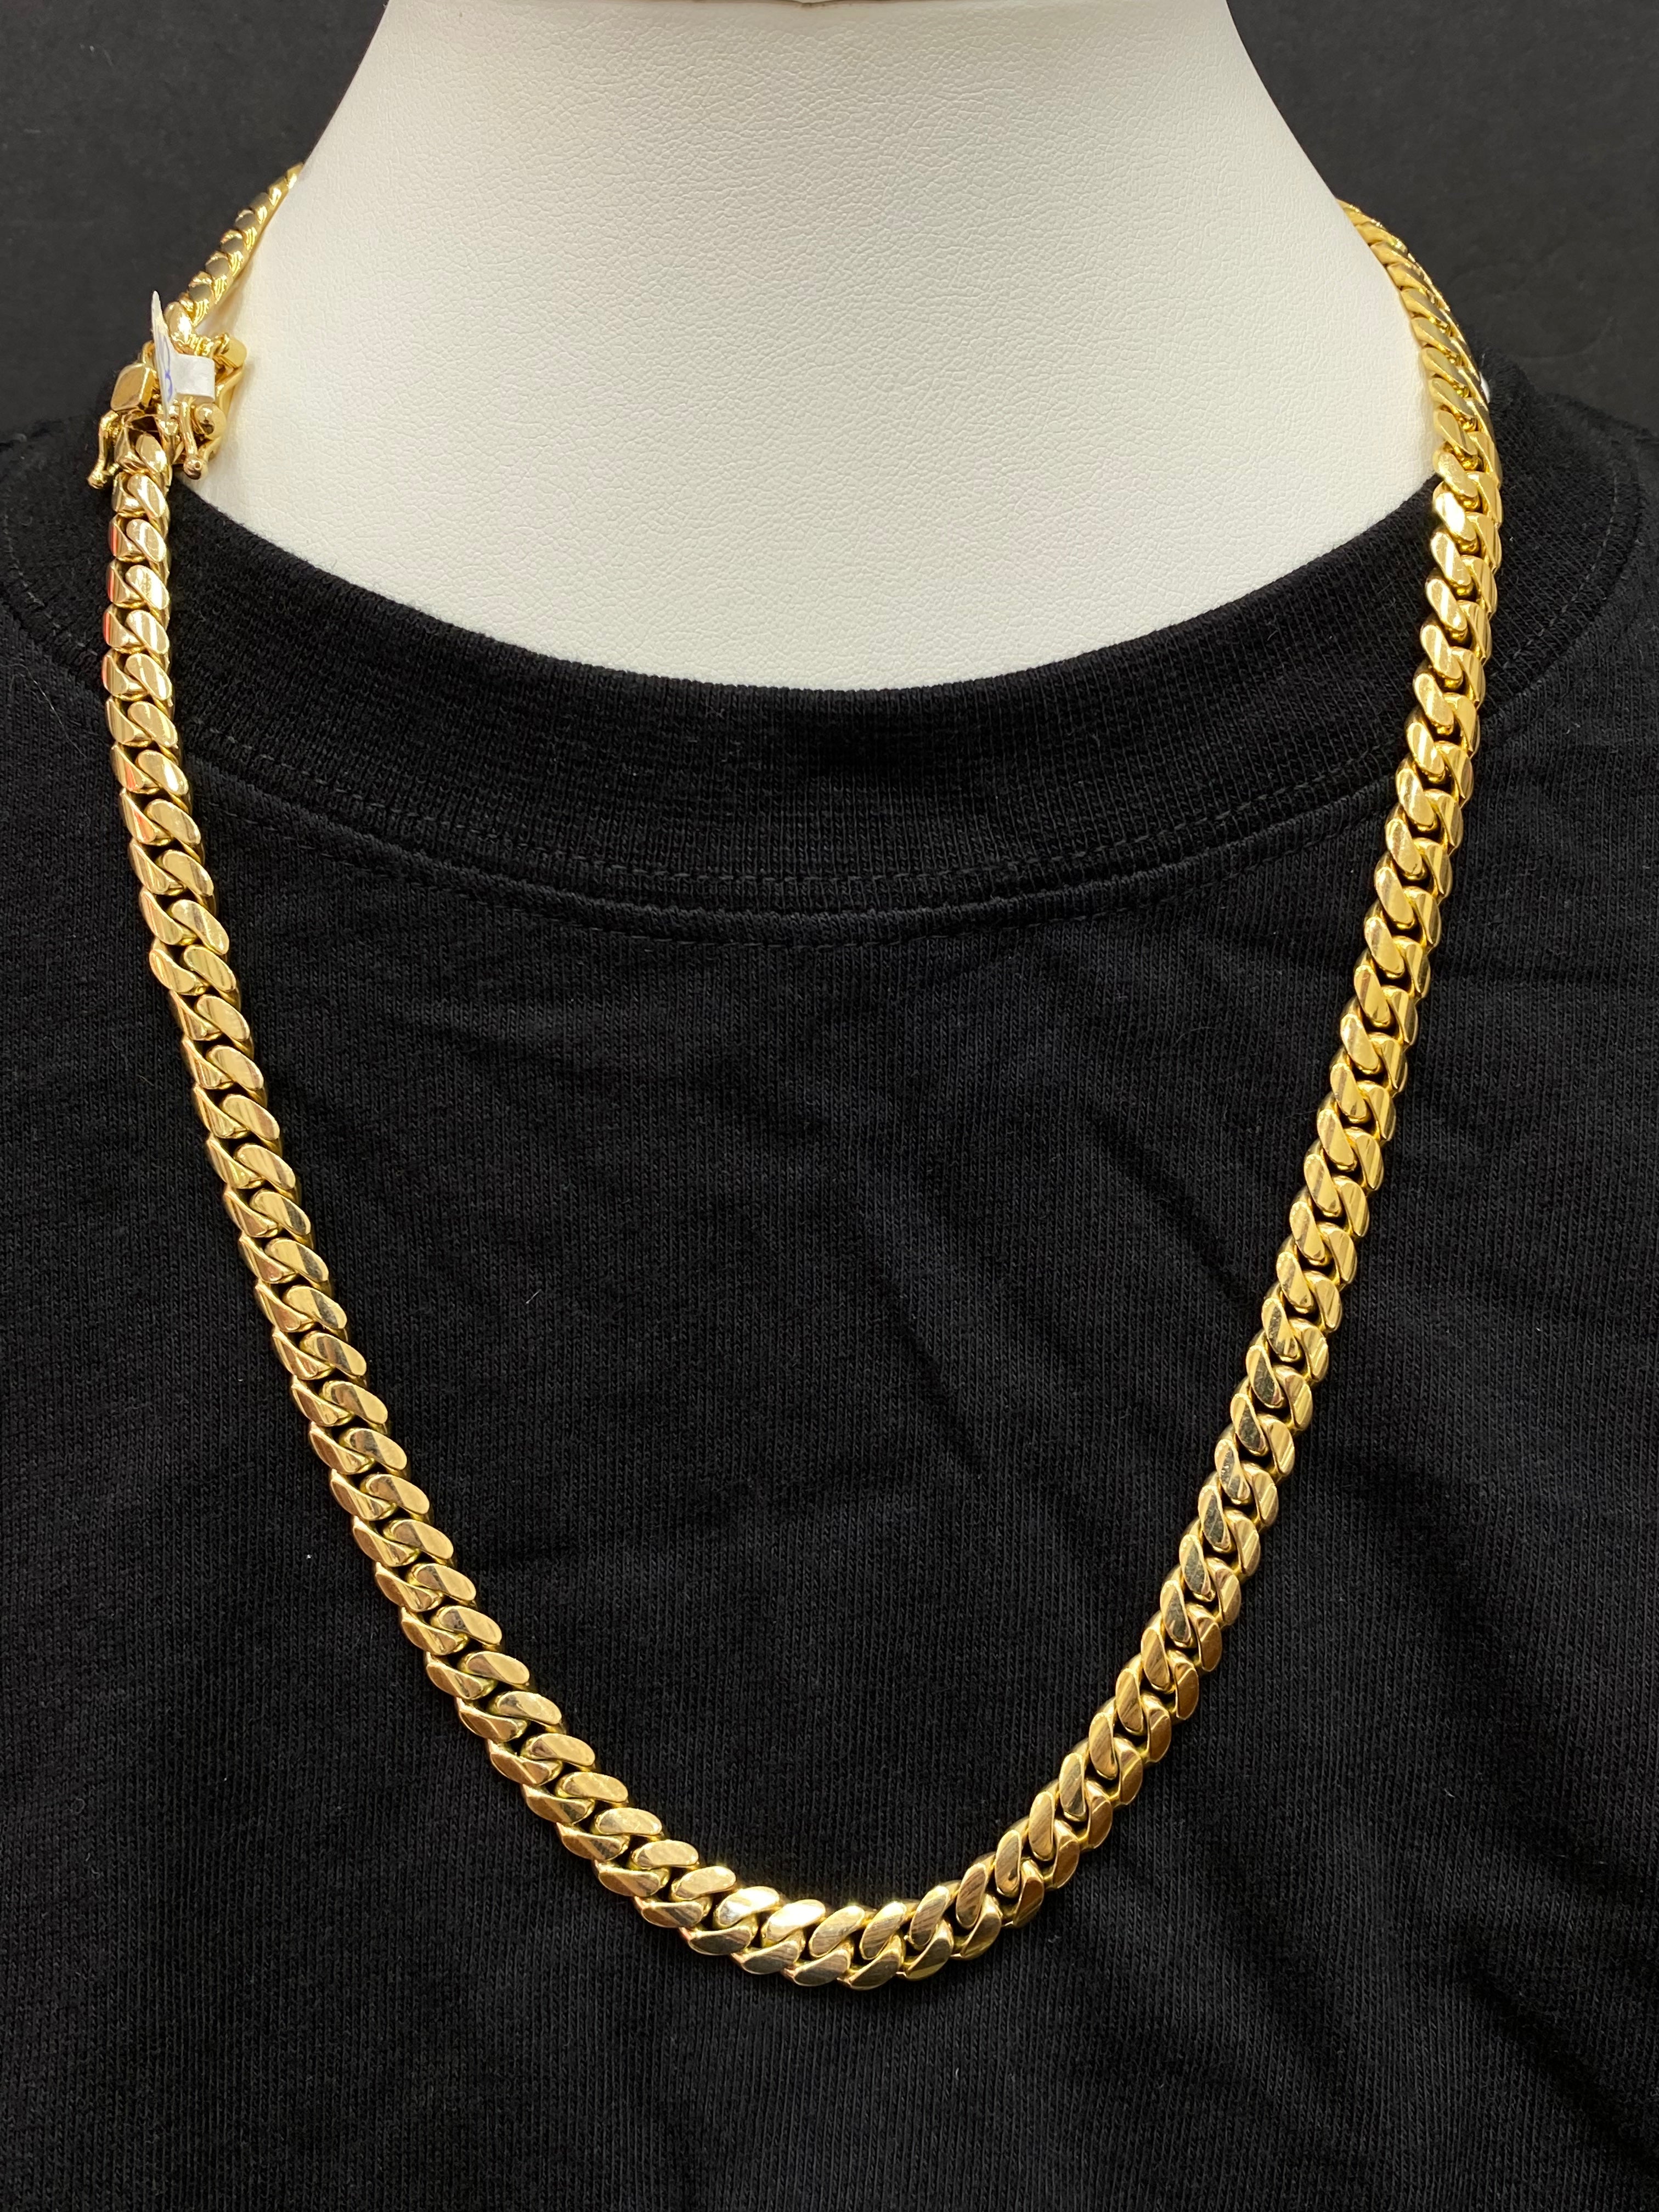 new 10k solid miami cuban link 6.5 millimeter from 20 inches to 28 inches (best price online in country) 28inch